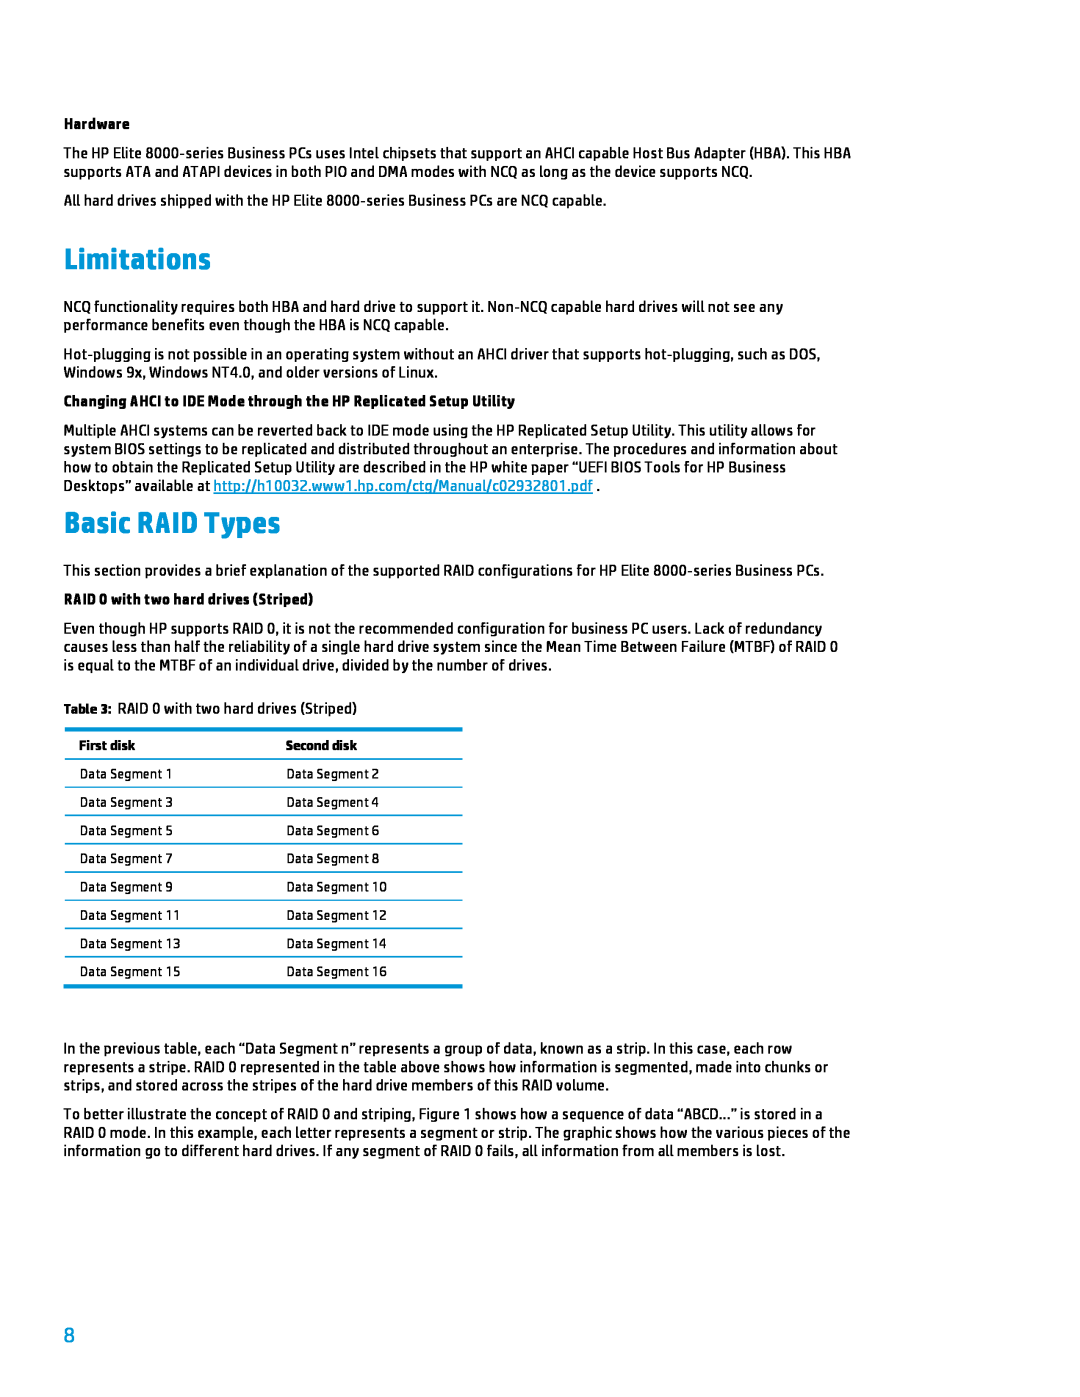 HP 8000 tower Limitations, Basic RAID Types, Hardware, Changing AHCI to IDE Mode through the HP Replicated Setup Utility 